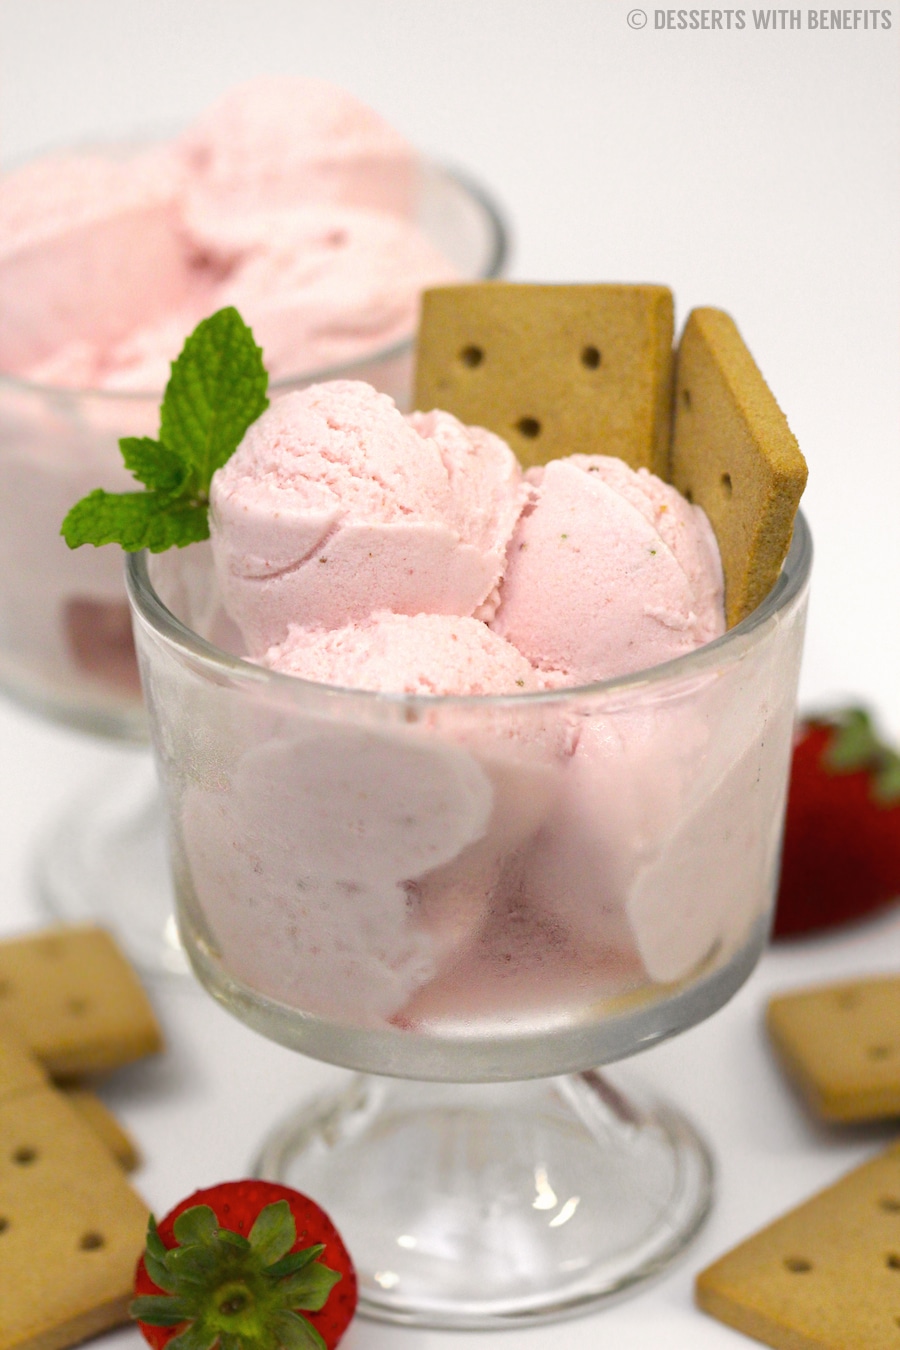 Healthy Strawberries and Cream Ice Cream (sugar free, low fat, low carb, high protein) – Healthy Dessert Recipes at The Desserts With Benefits Blog